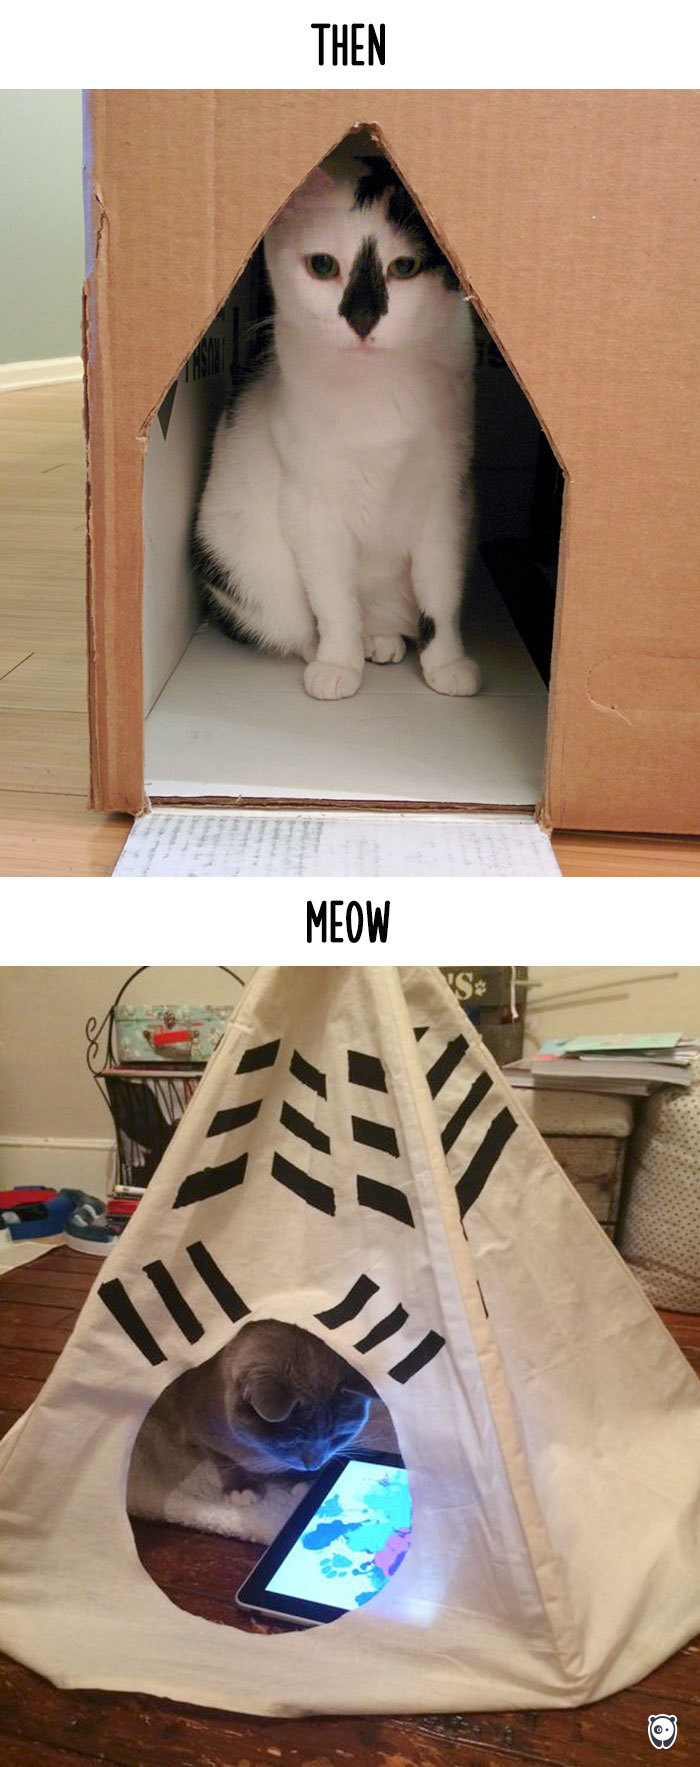 cats-then-now-funny-technology-change-life-20-571625ec249b3__700